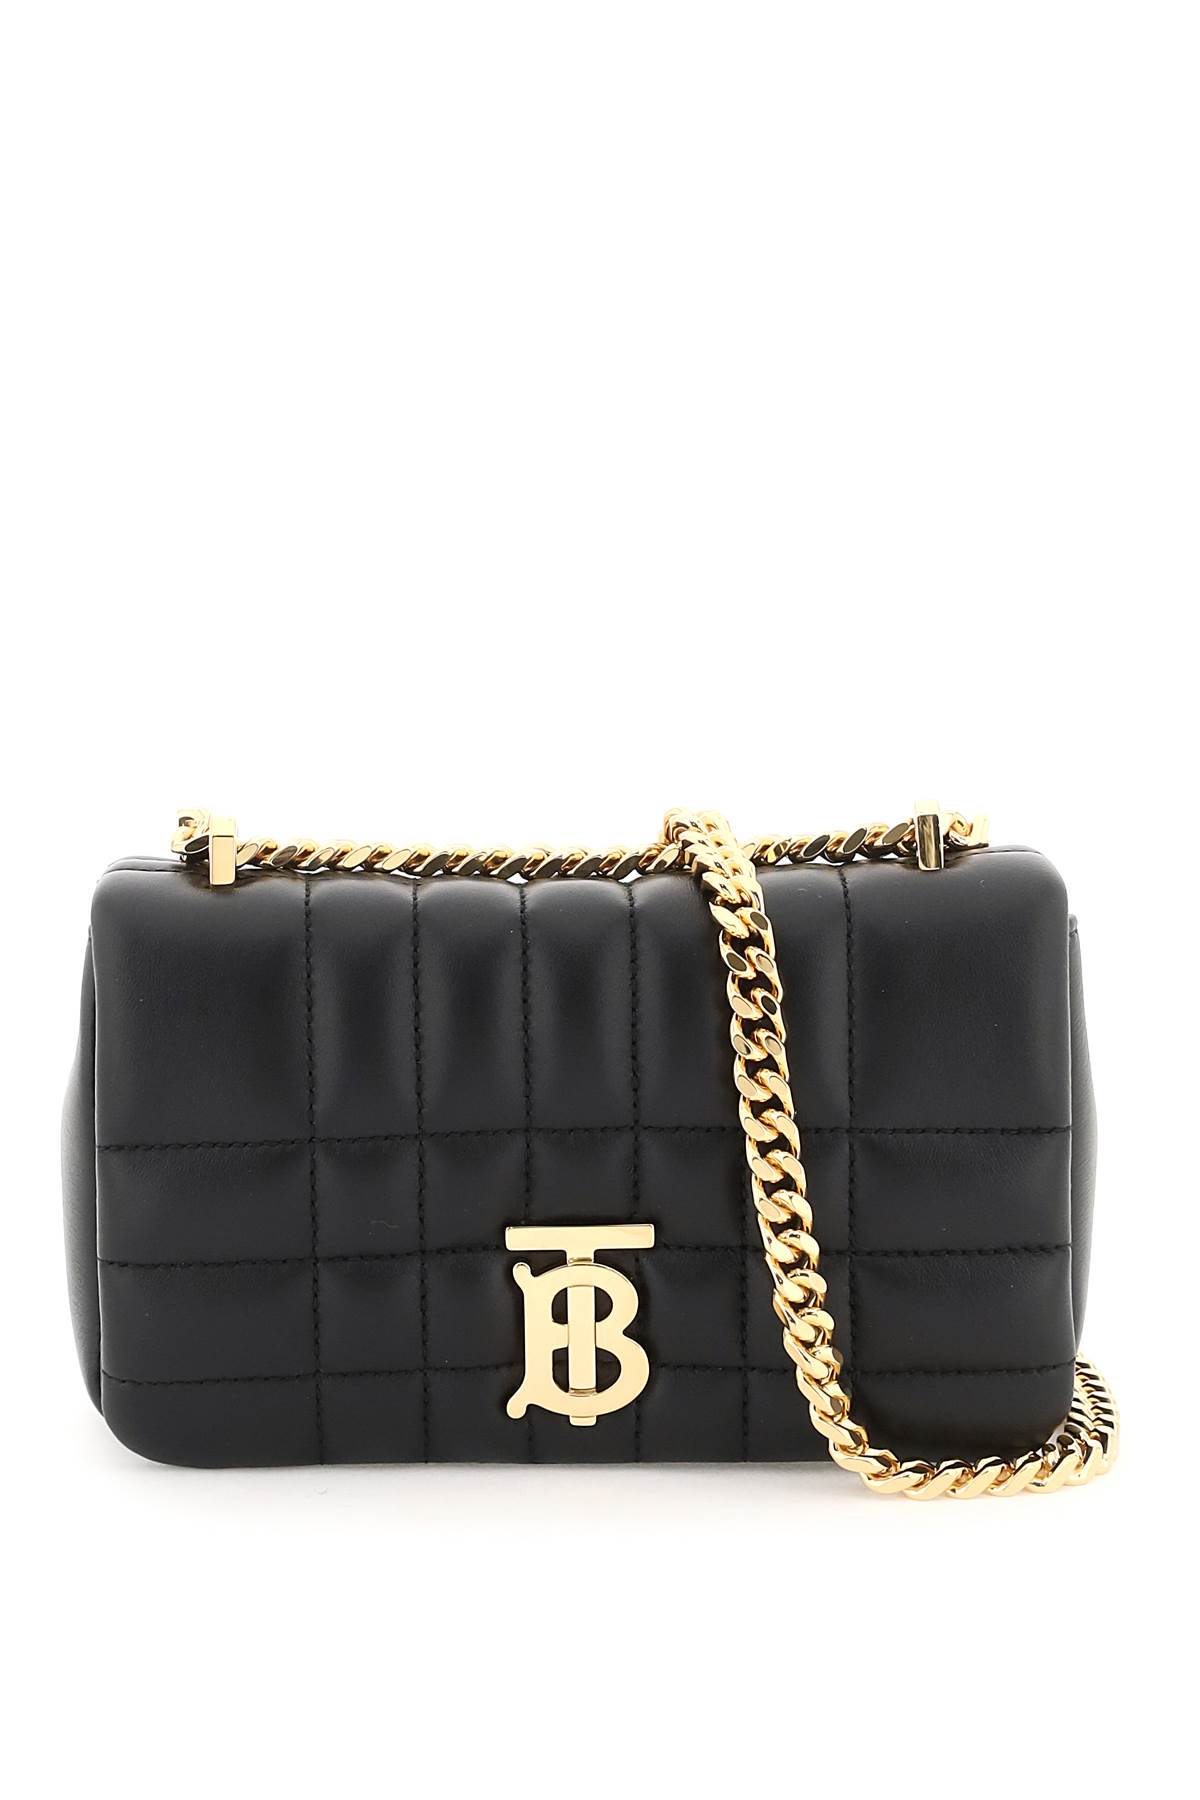 BURBERRY QUILTED LEATHER LOLA MINI BAG BLACK | BURBERRY | KRISSHOP ...